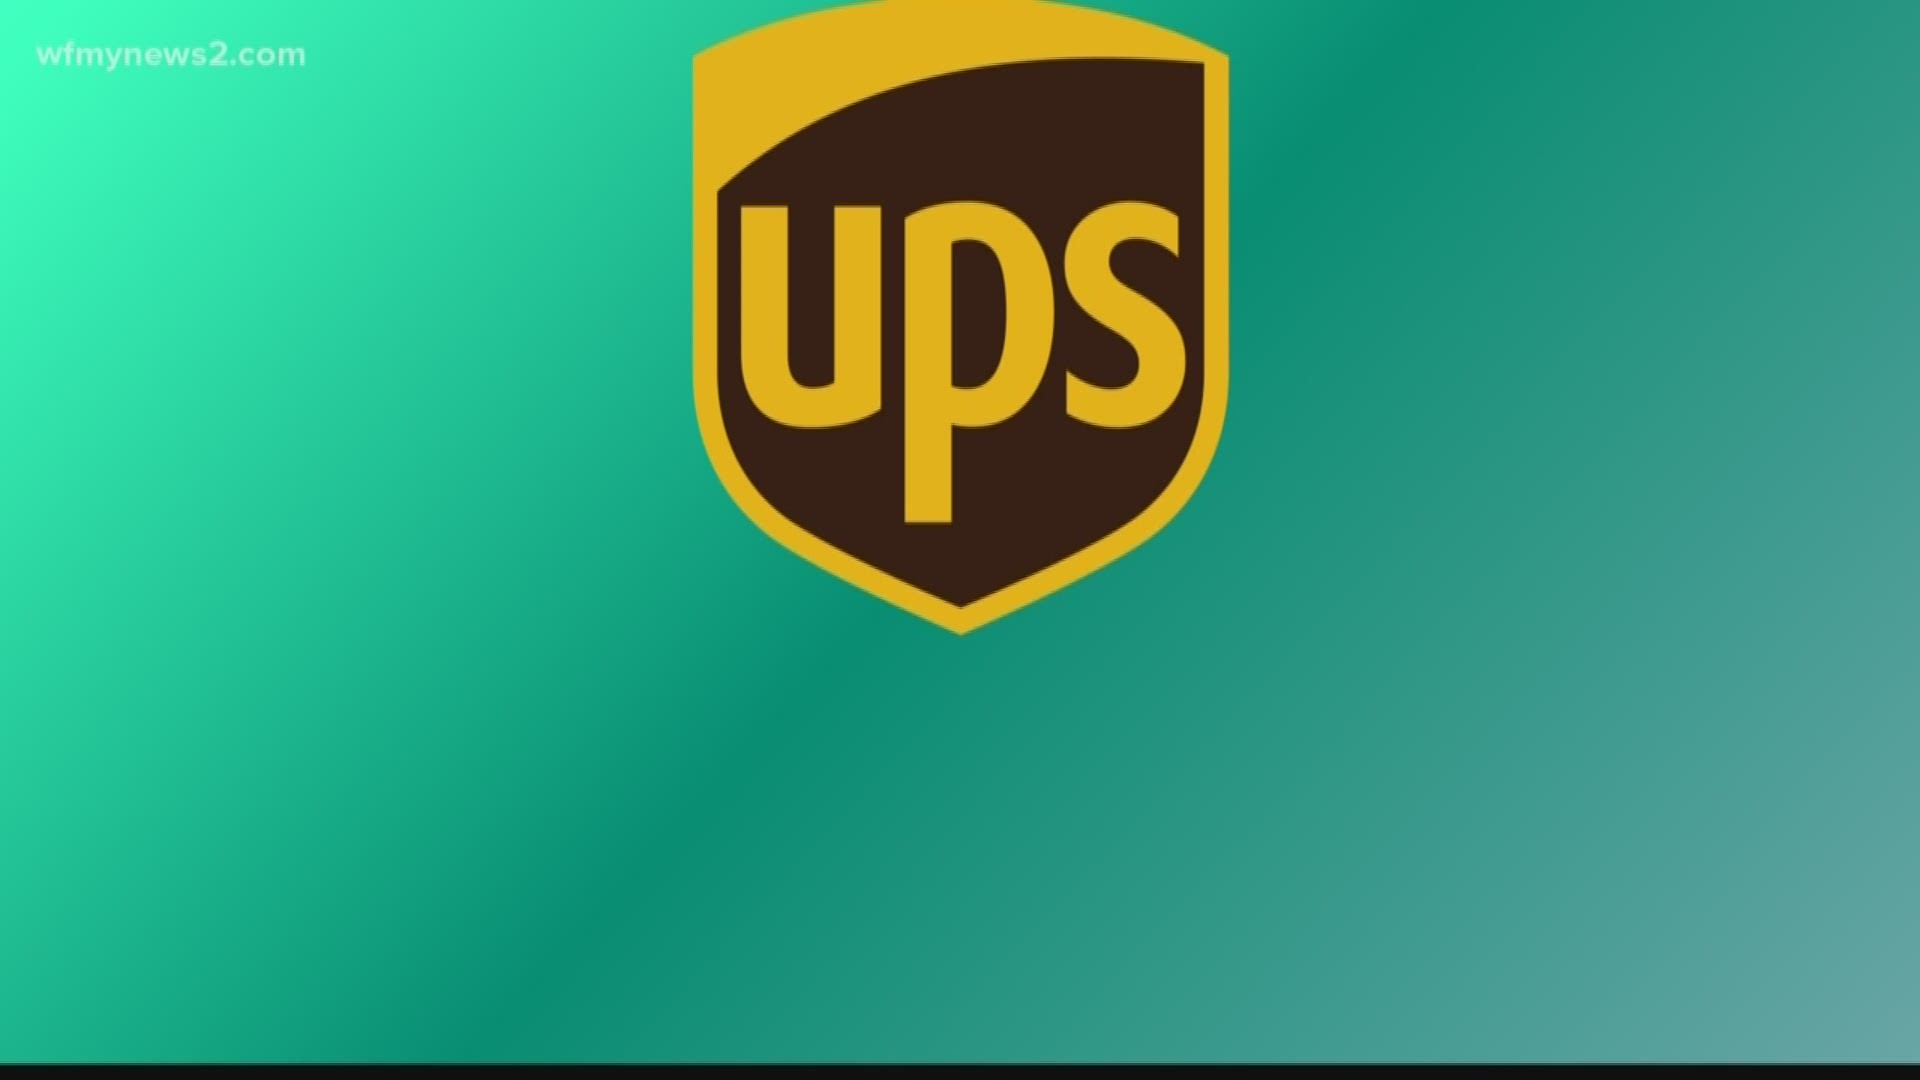 UPS is hiring more than 600 people to work ahead of the busy holiday shopping season